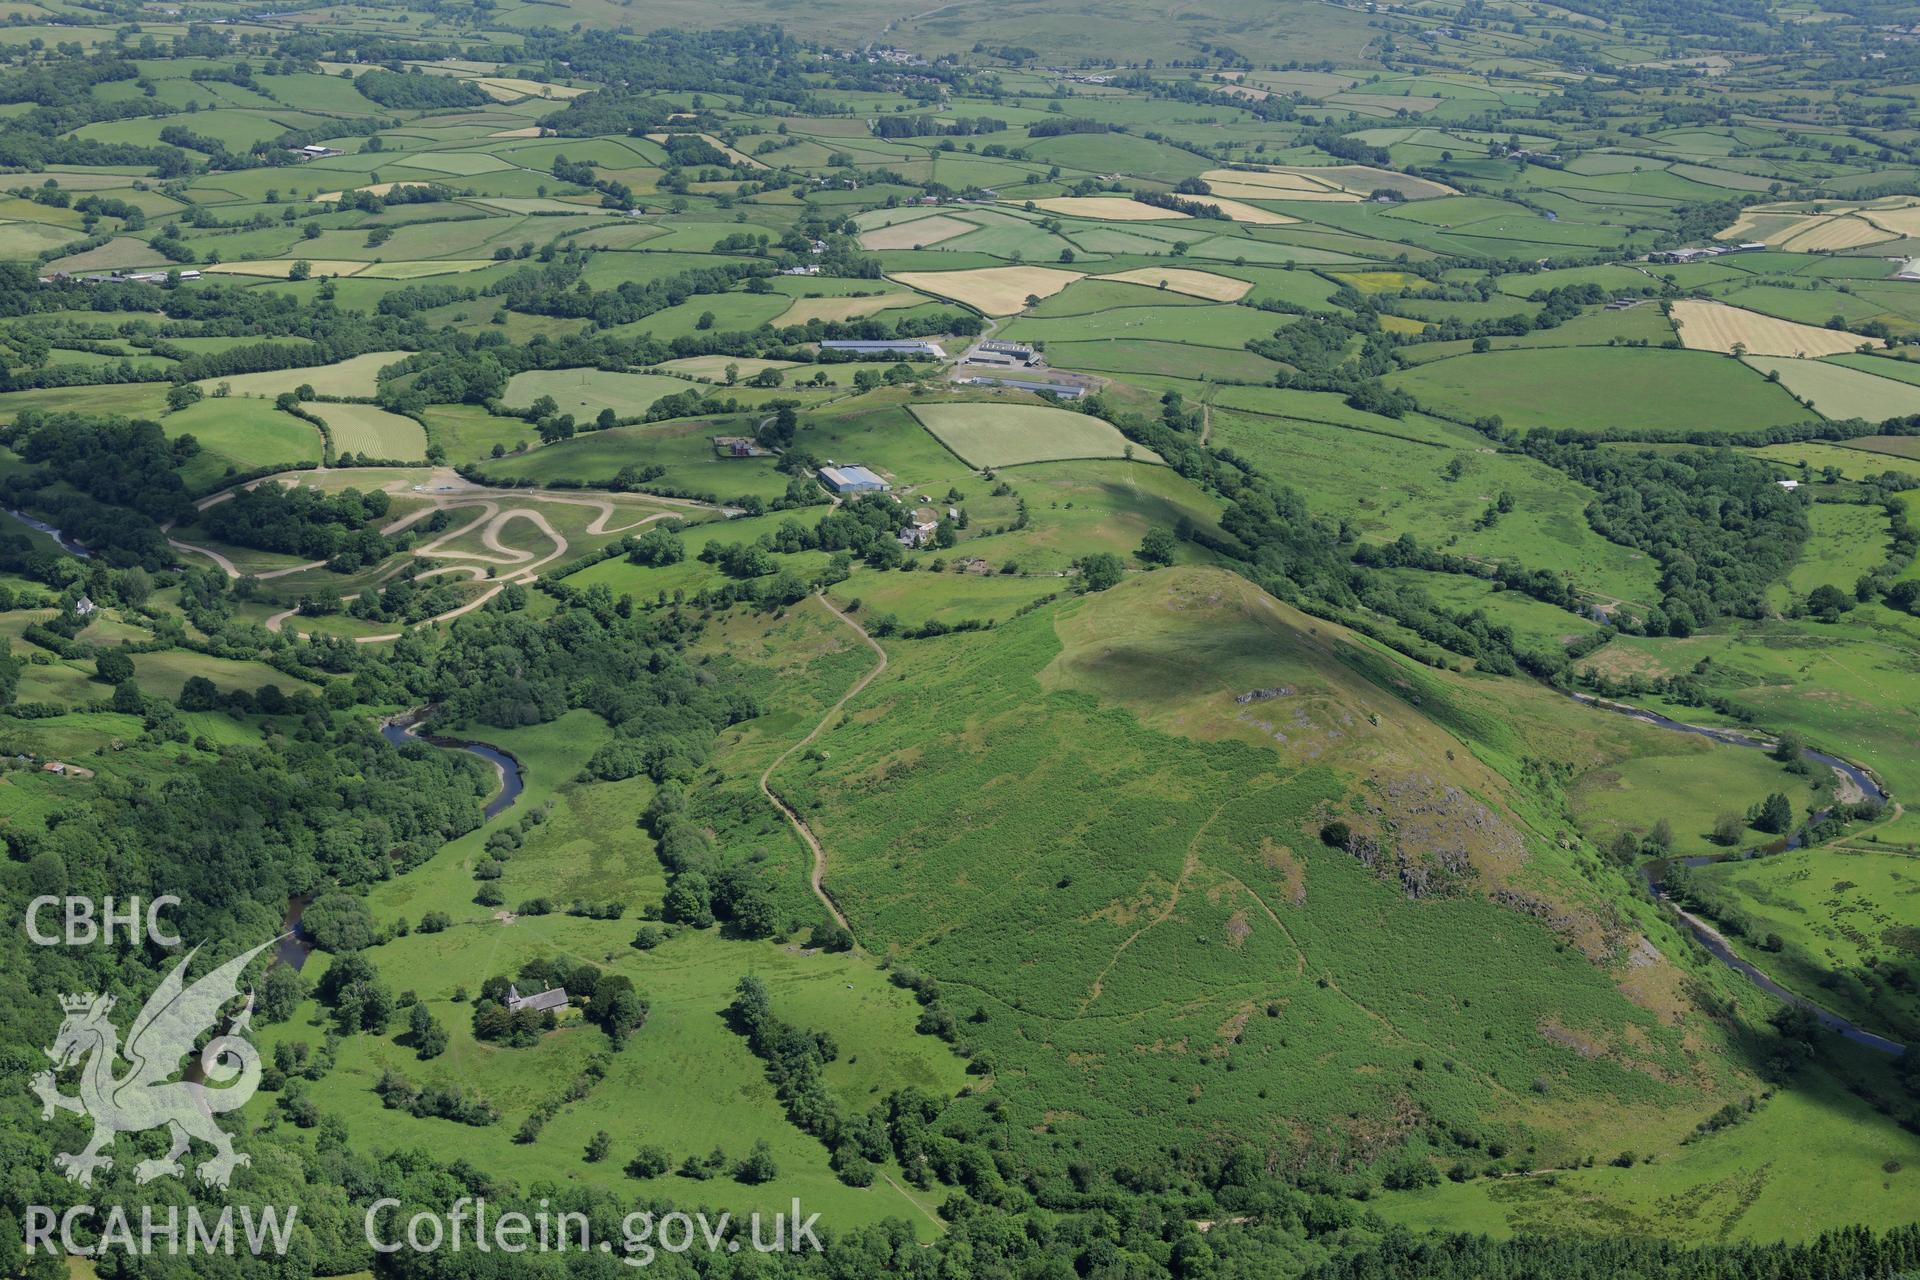 Cefnllys Castle, with St. Mary's church and Neuadd Farm in its shadow, east of Llandrindod Wells. Oblique aerial photograph taken during the Royal Commission's programme of archaeological aerial reconnaissance by Toby Driver on 30th June 2015.